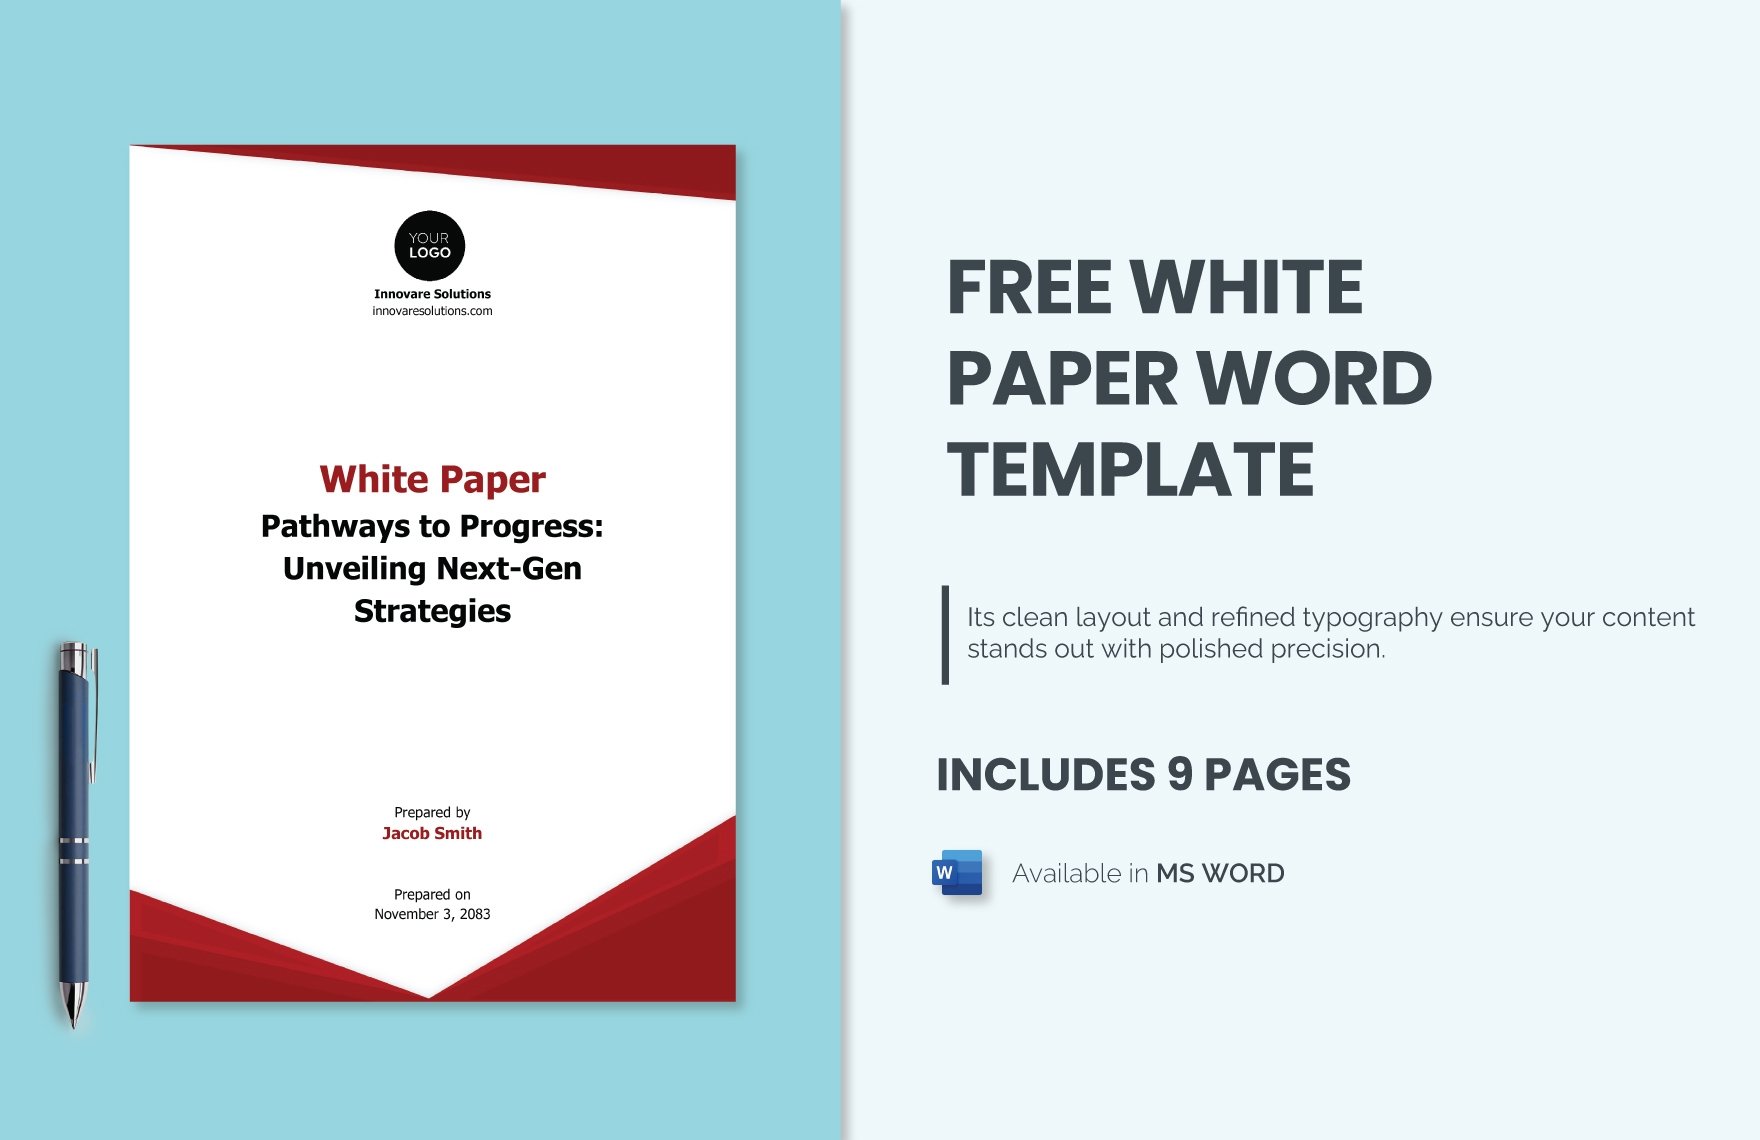 White Paper in Word - FREE Template Download